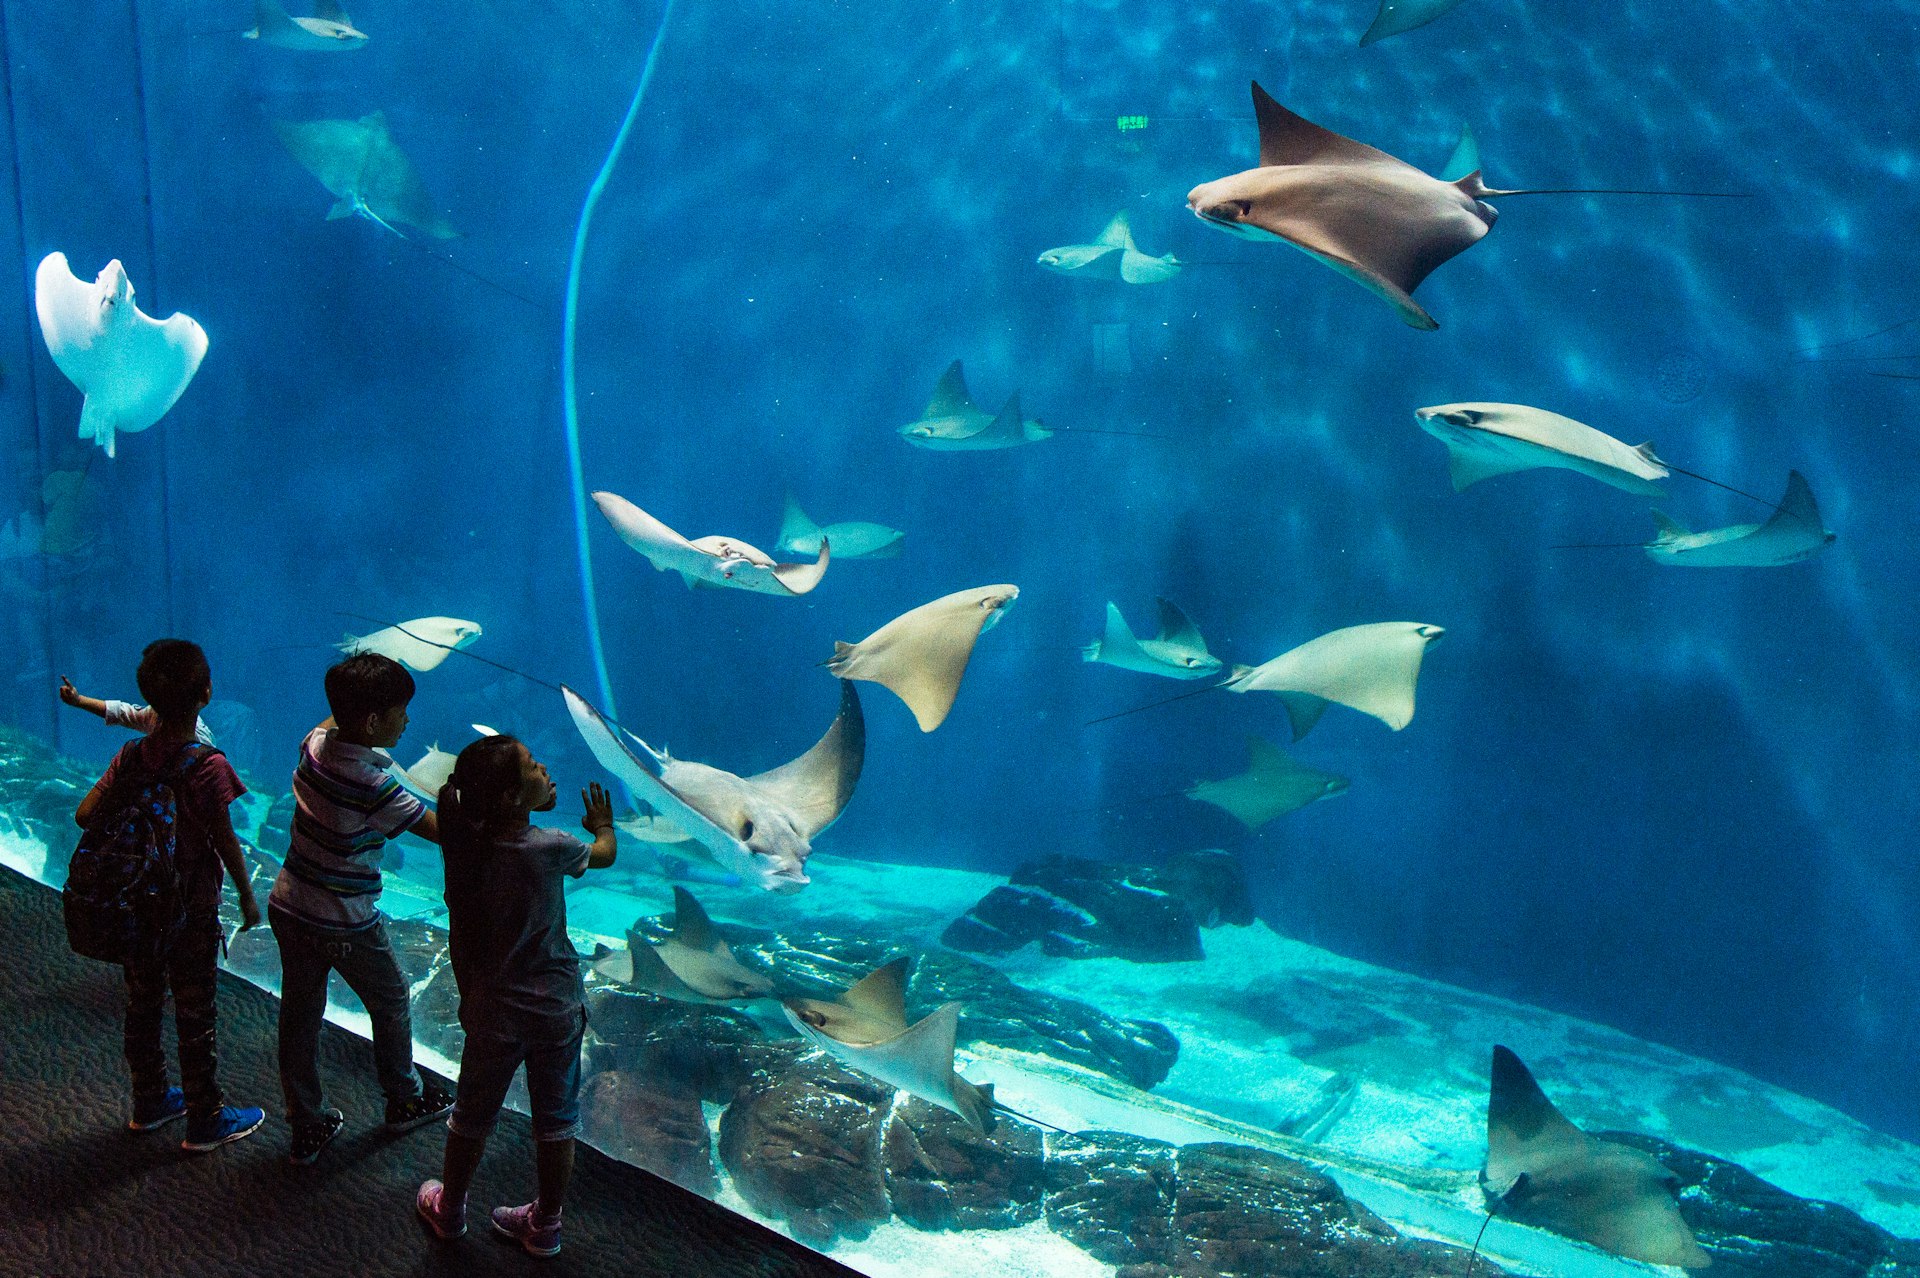 Three kids are silhouetted against the backdrop of a lit-up aquarium tank, with colorful fish and rays